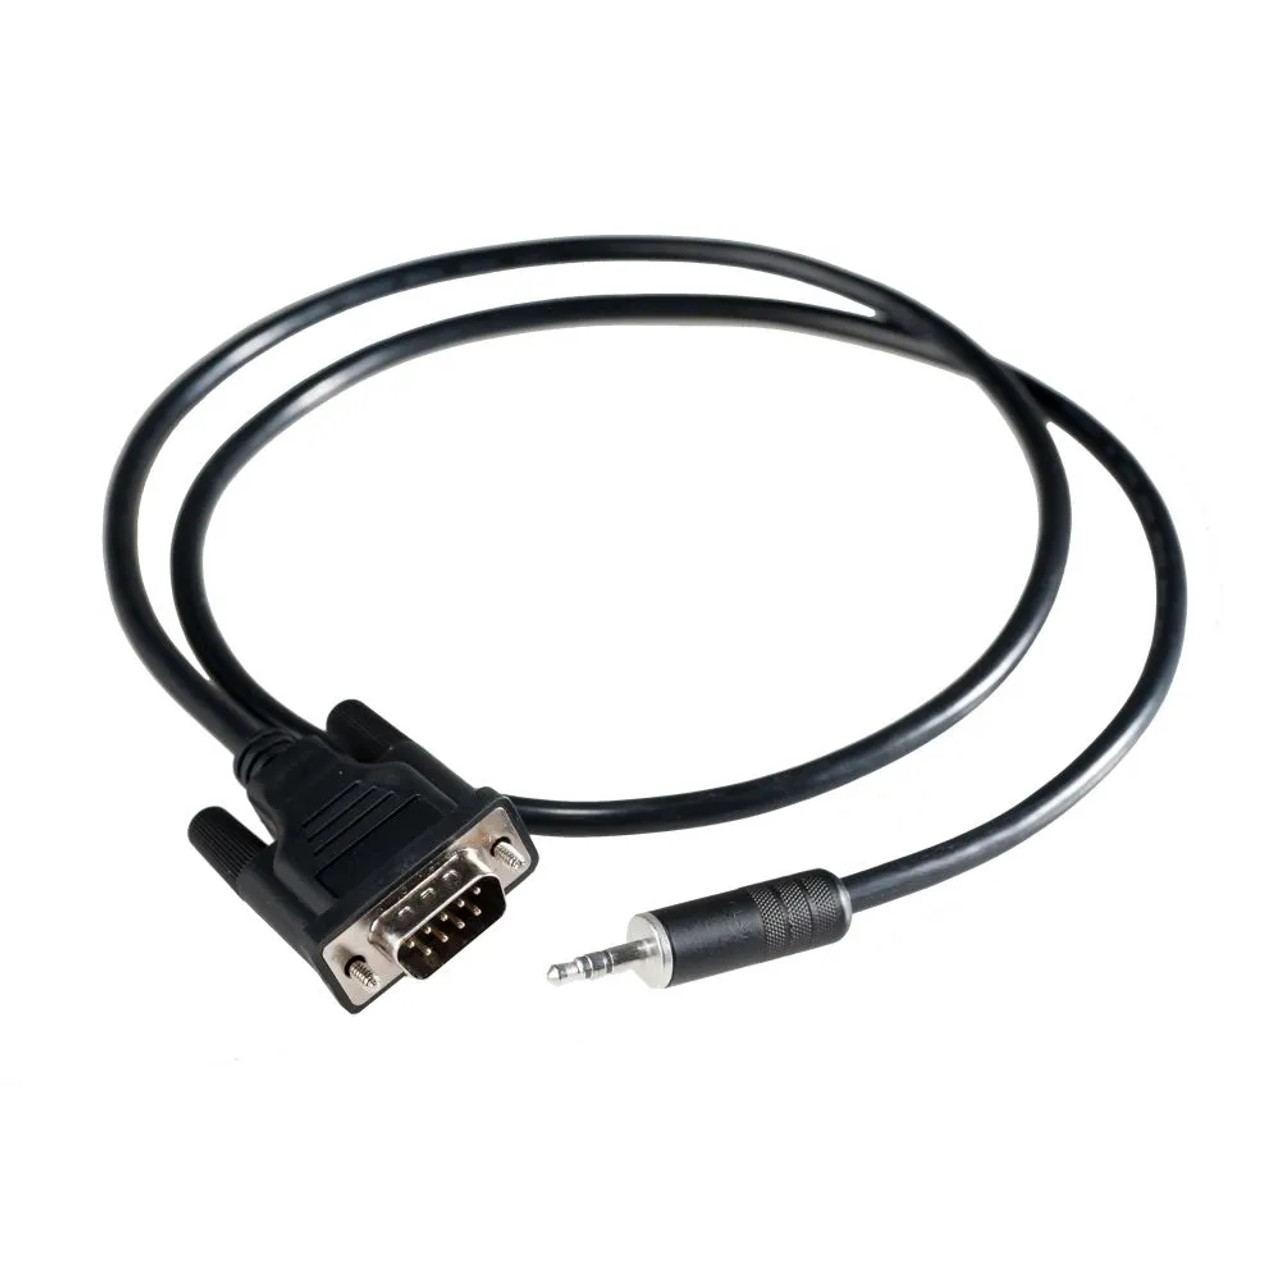 Global Cache iTach Flex RS232 Link Cable